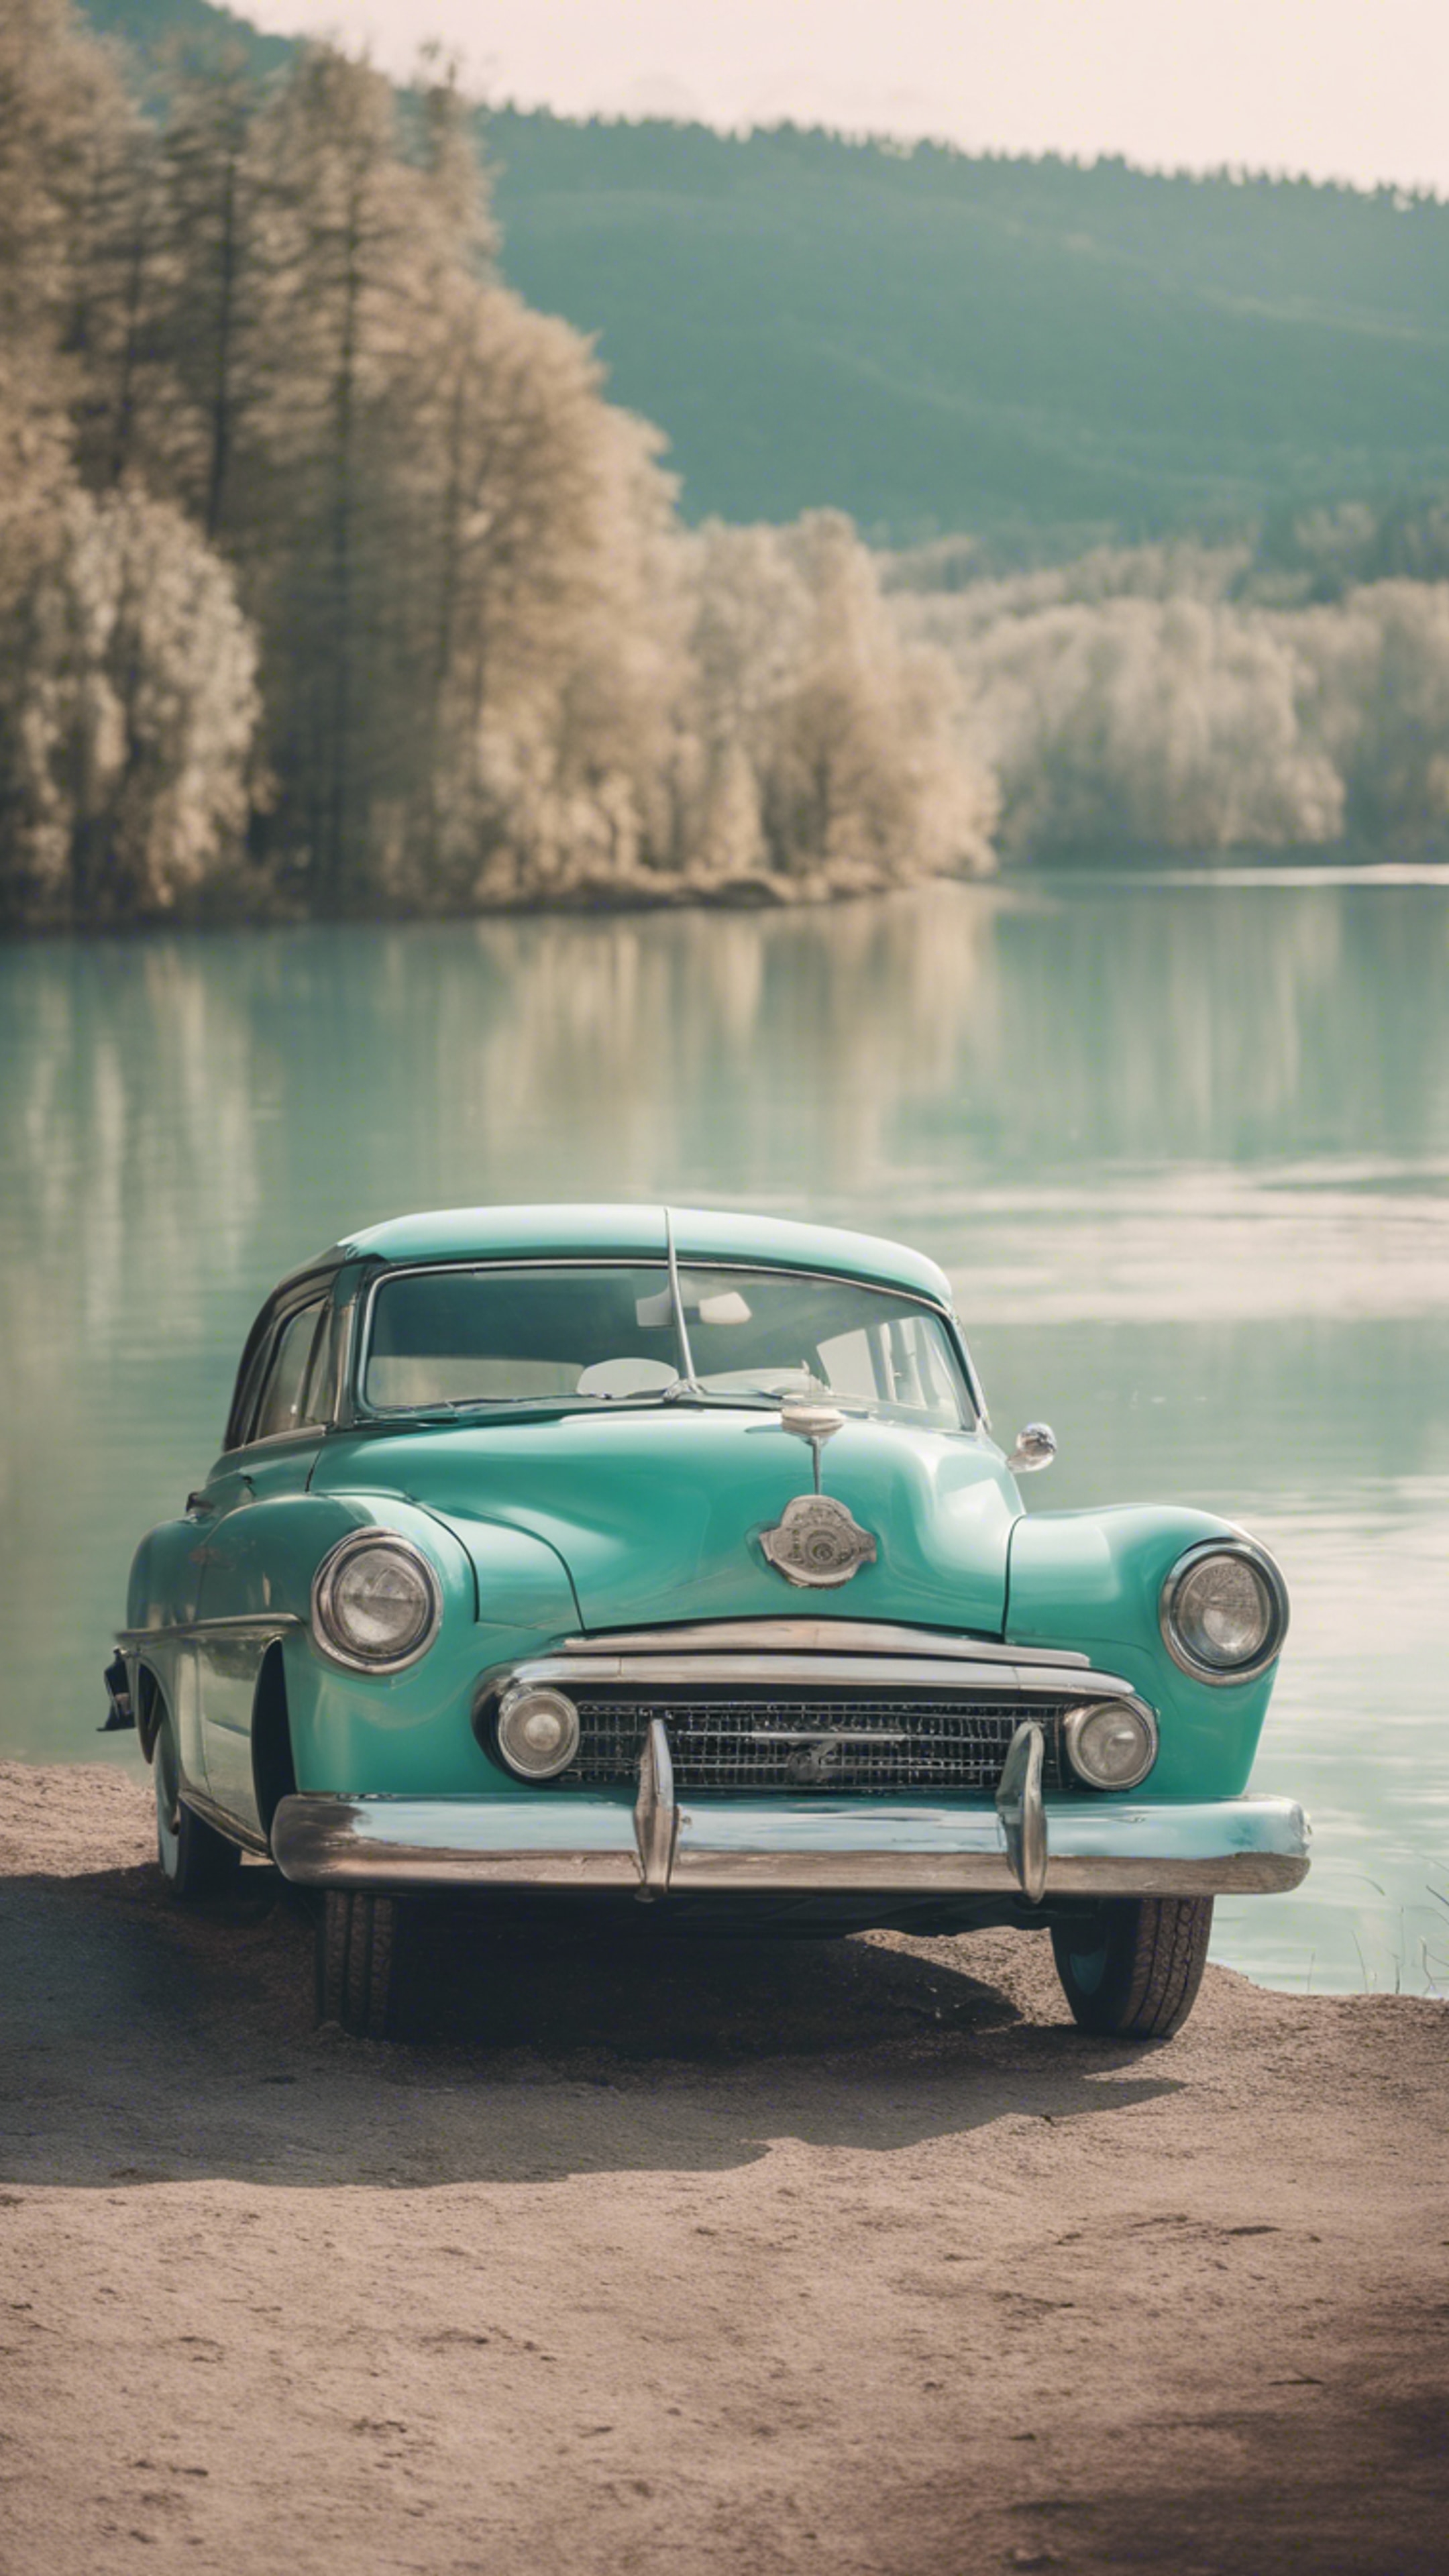 An old, vintage car in cool pastel teal, parked by a beautiful lake. Обои[2497290a3fc344ac9be5]